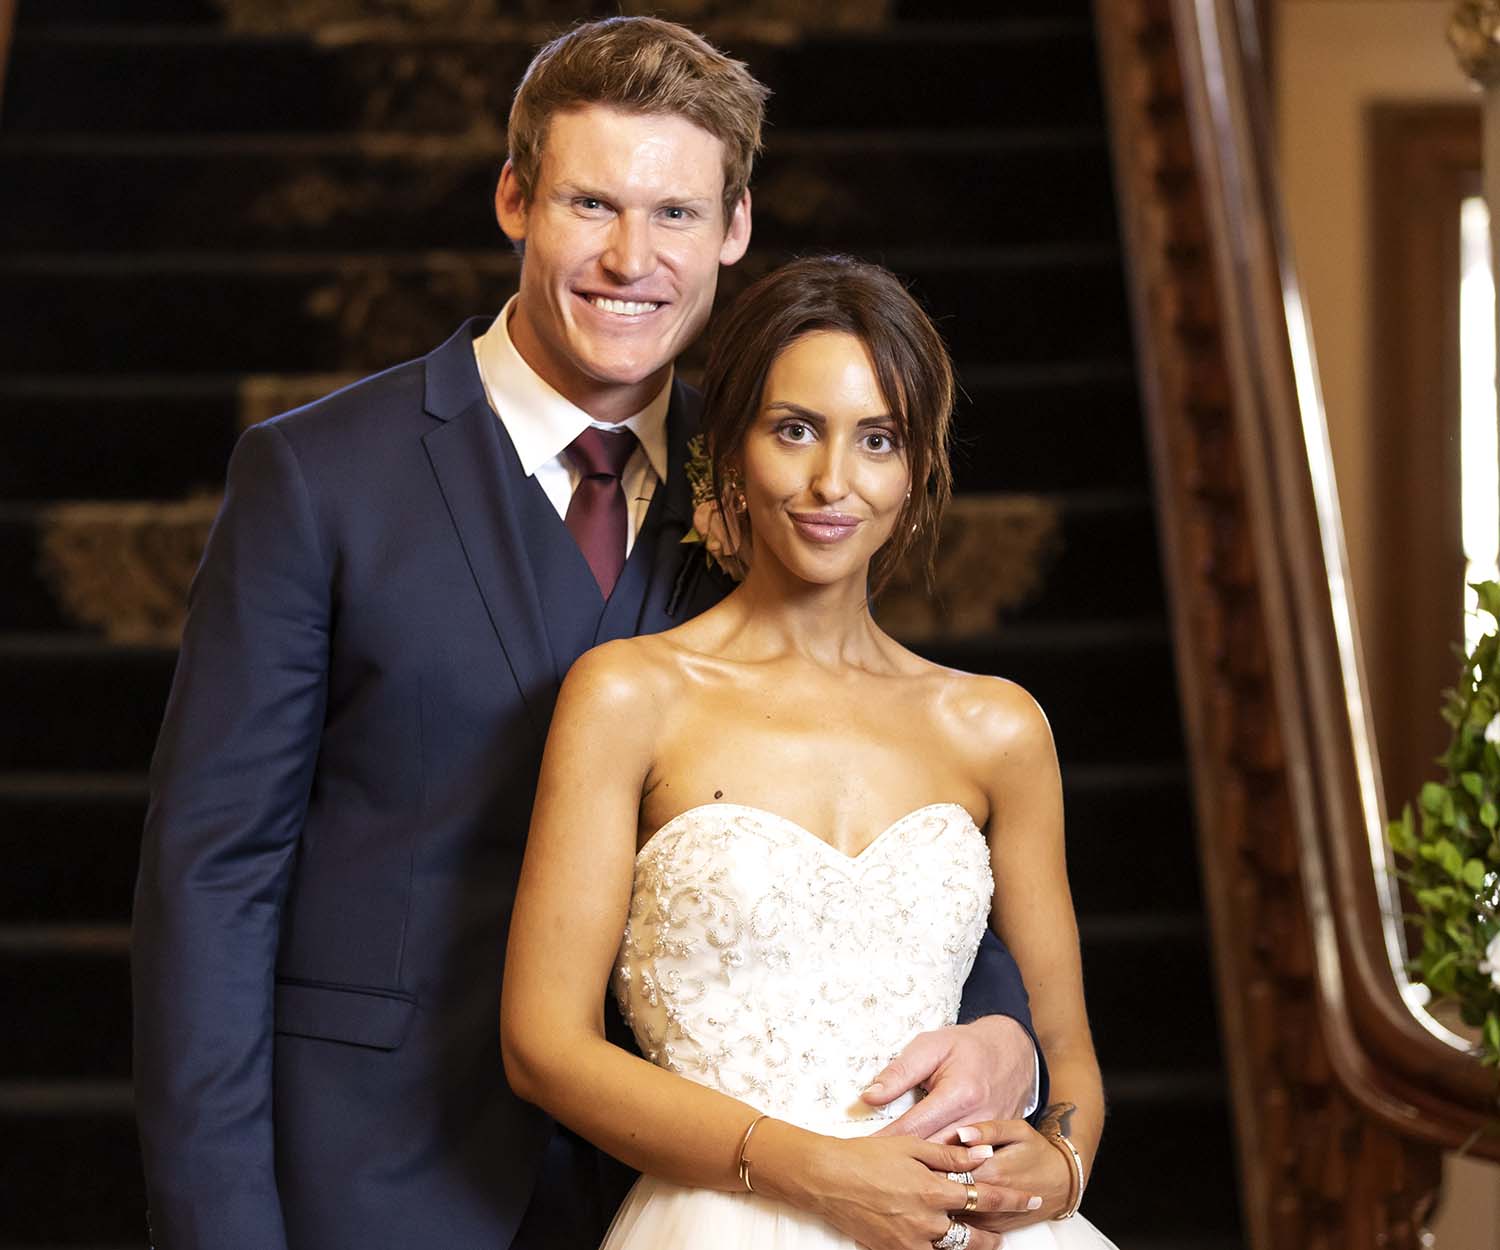 Lizzie Sobinoff Seb Guilhaus married at first sight